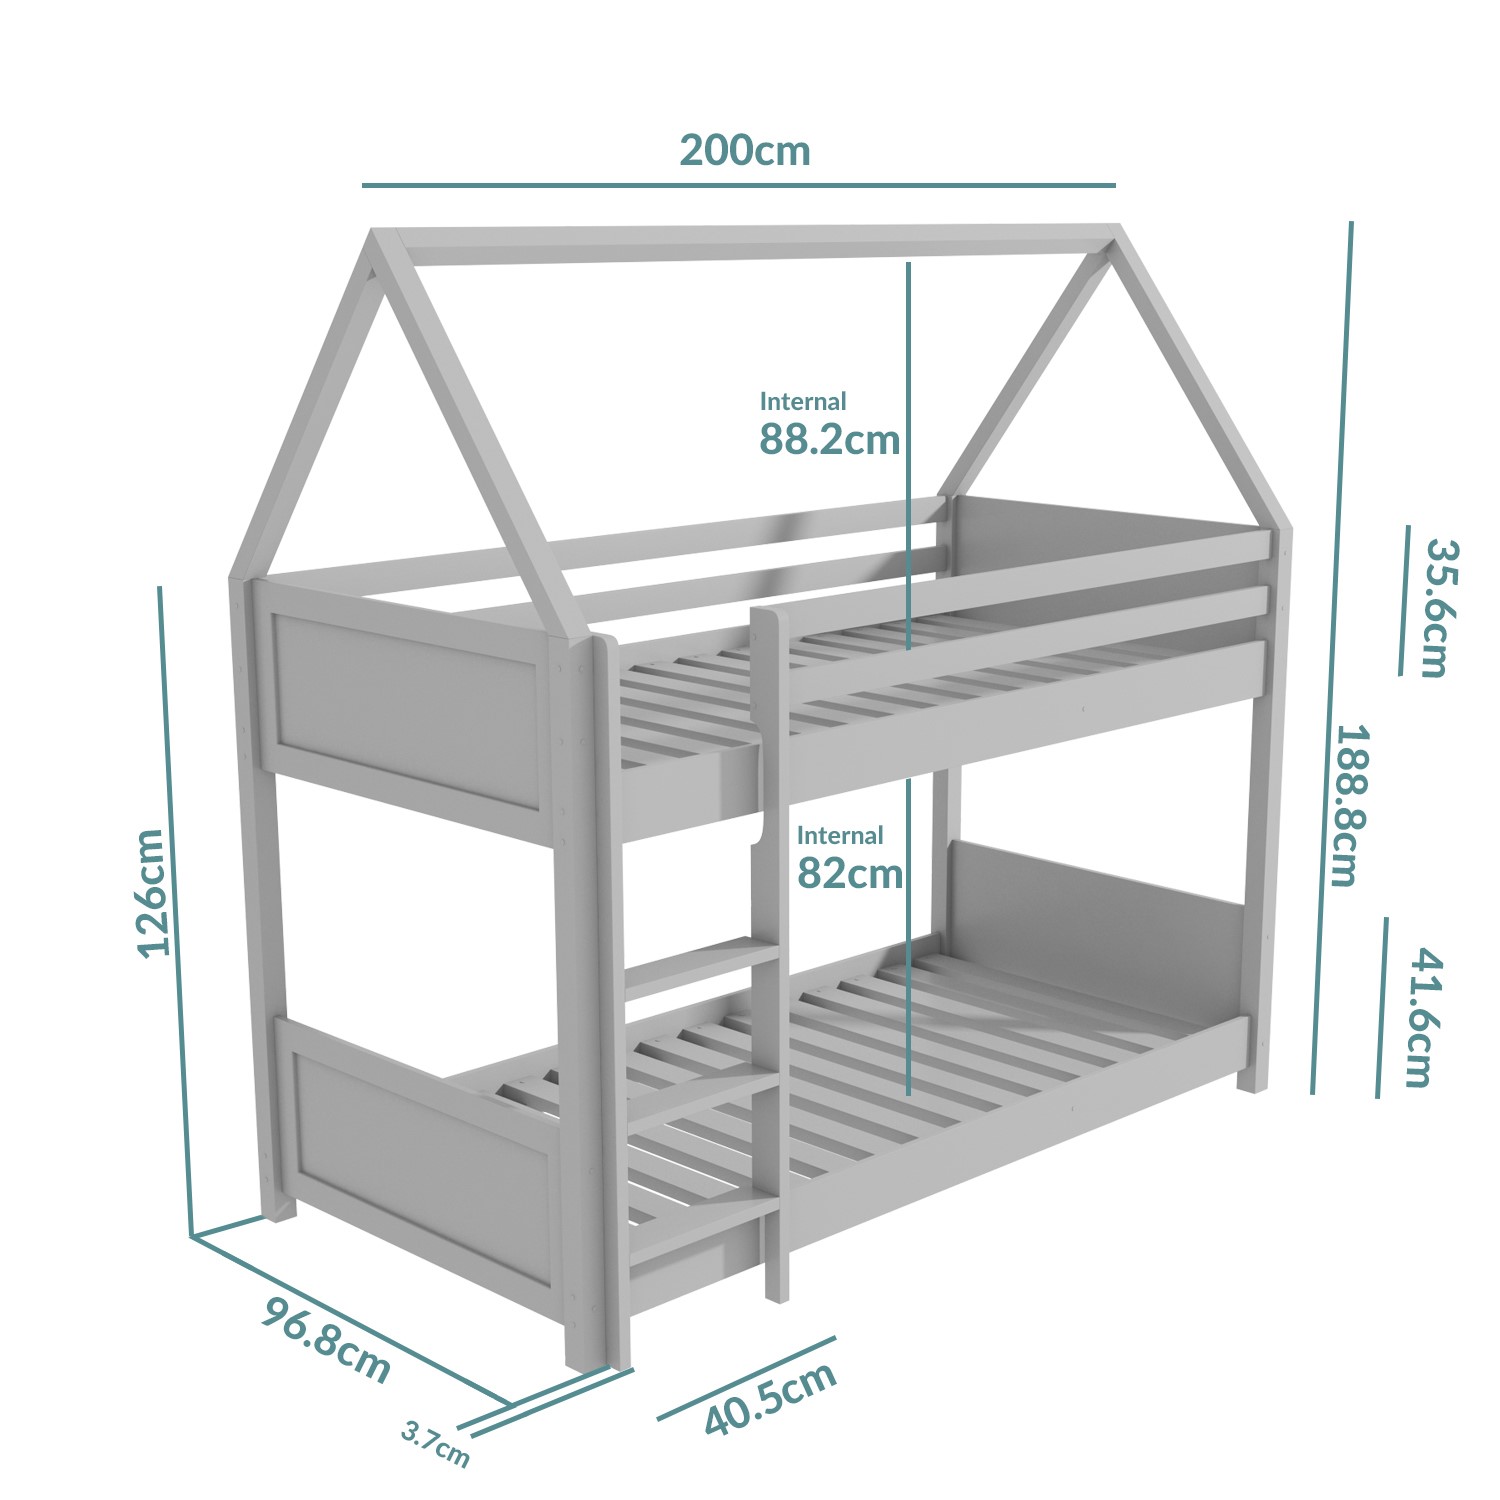 Read more about House bunk bed in grey coco